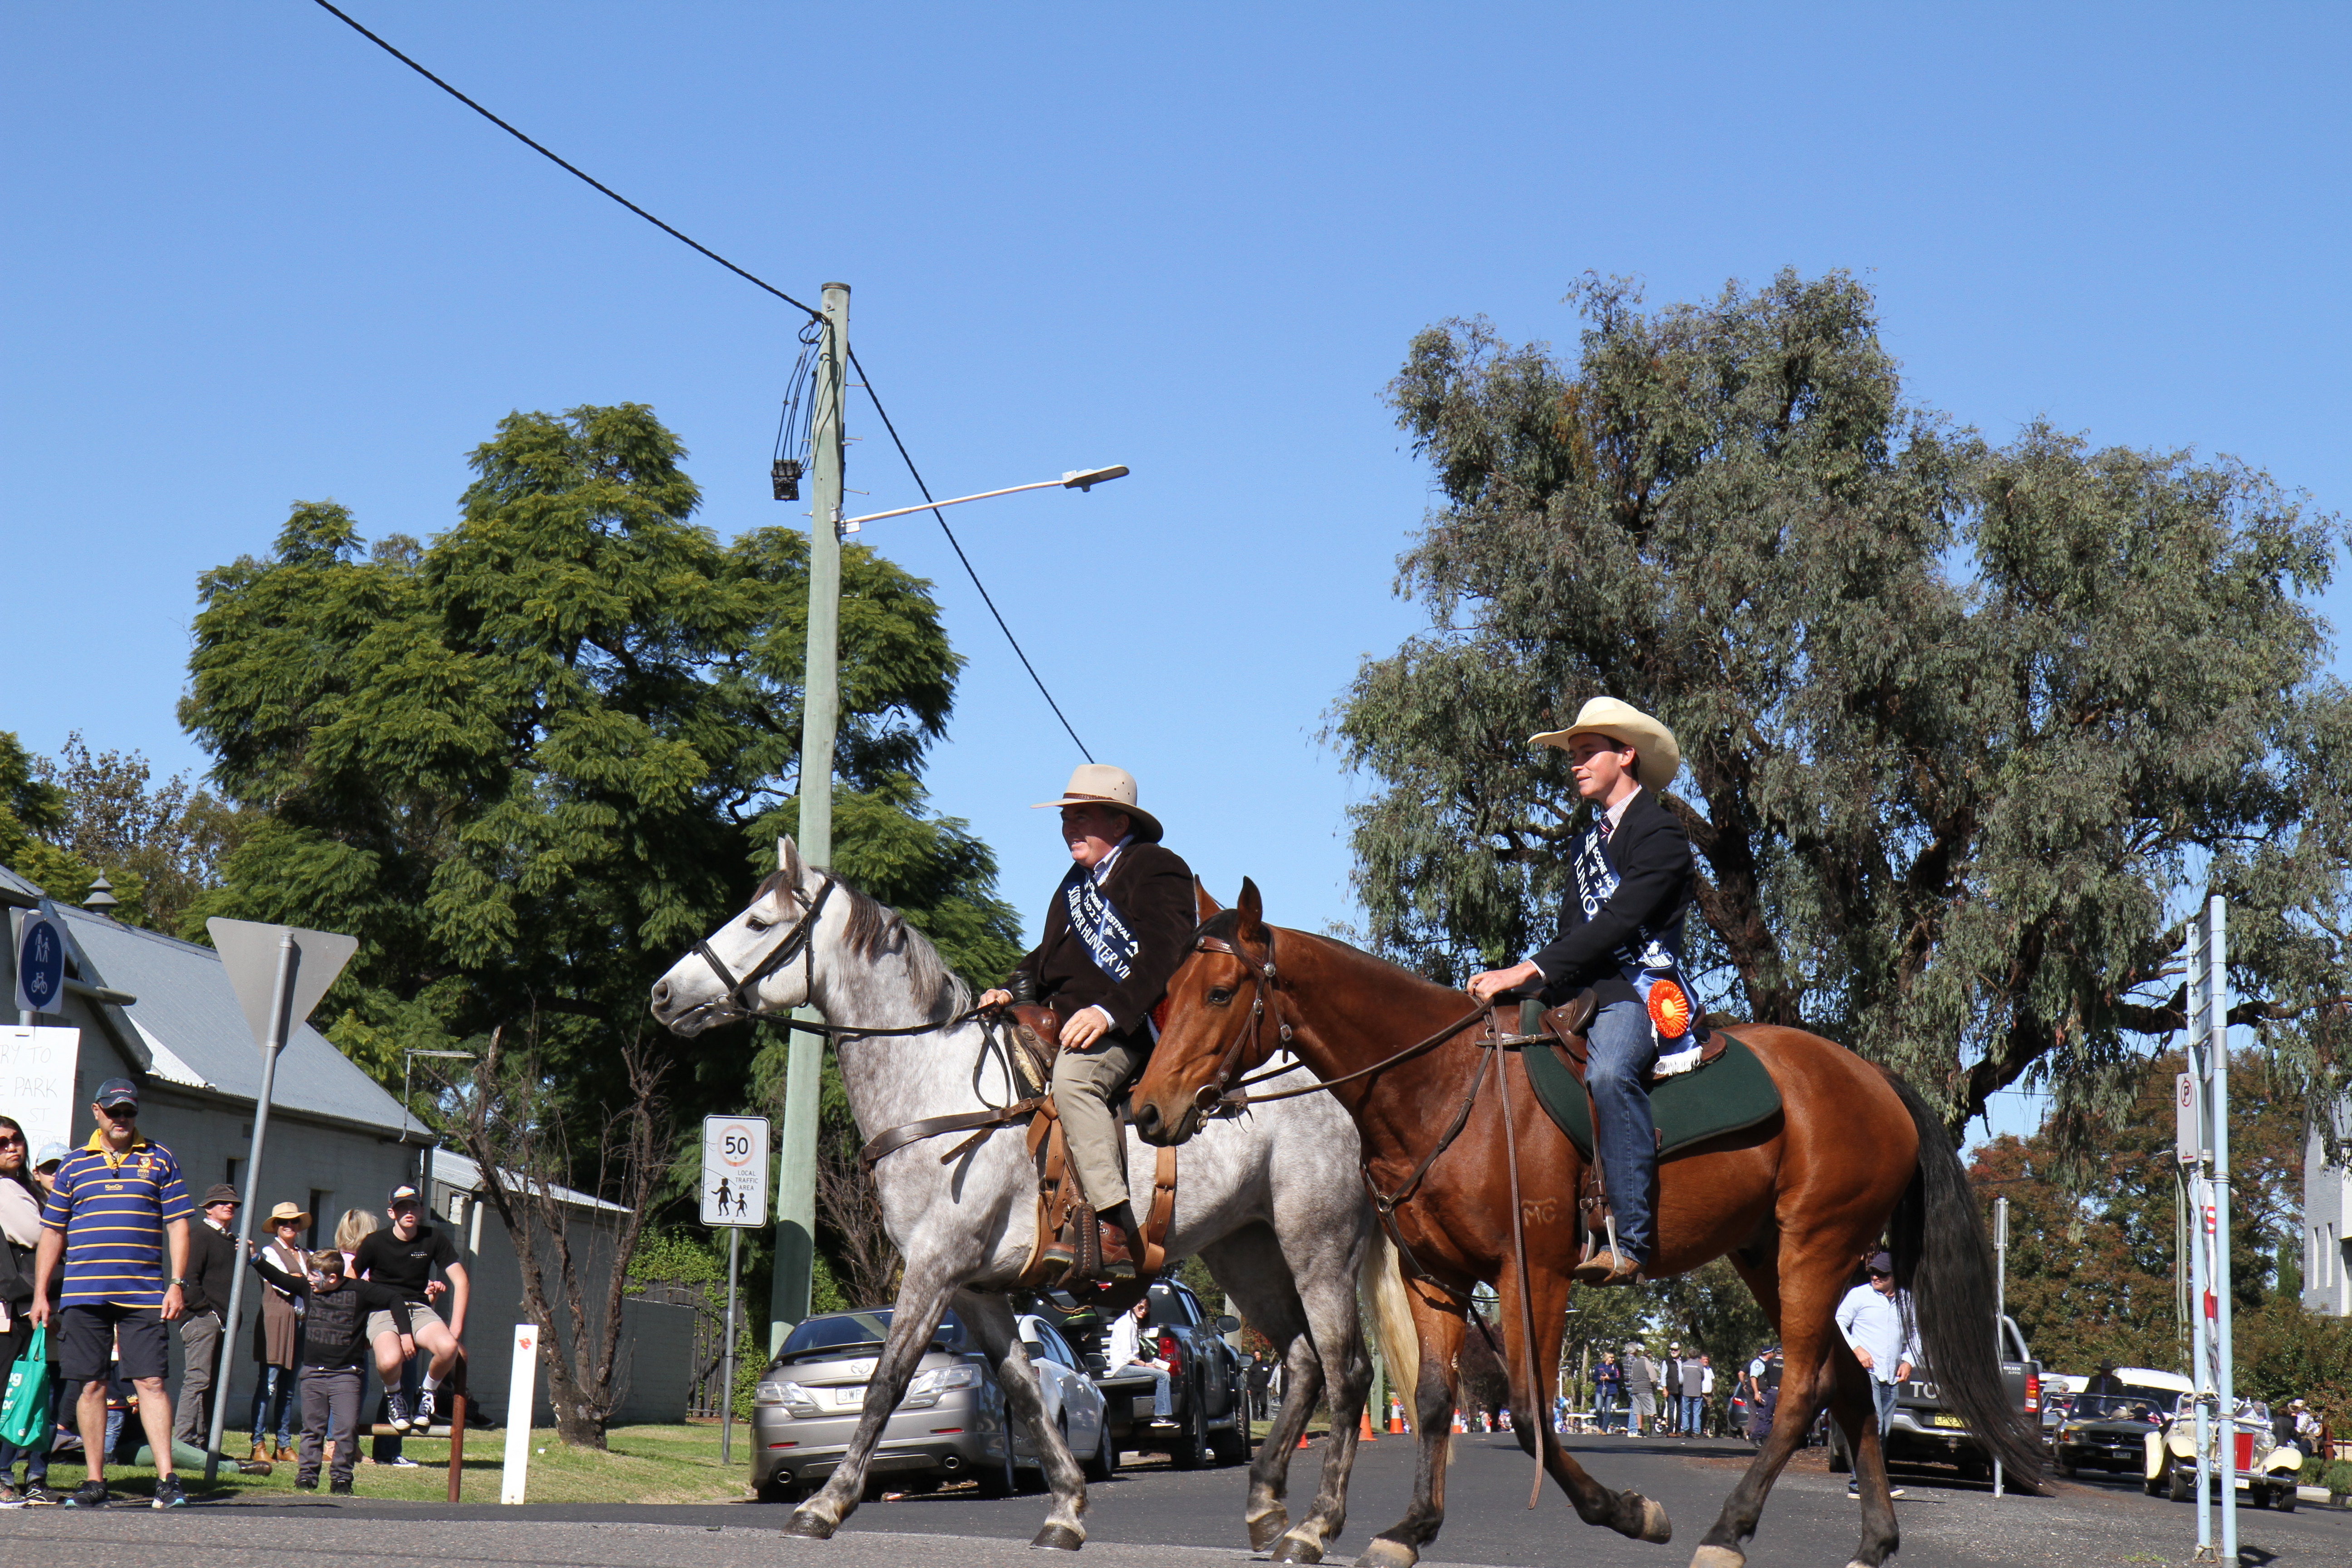 Return to normality for Scone Horse Festival